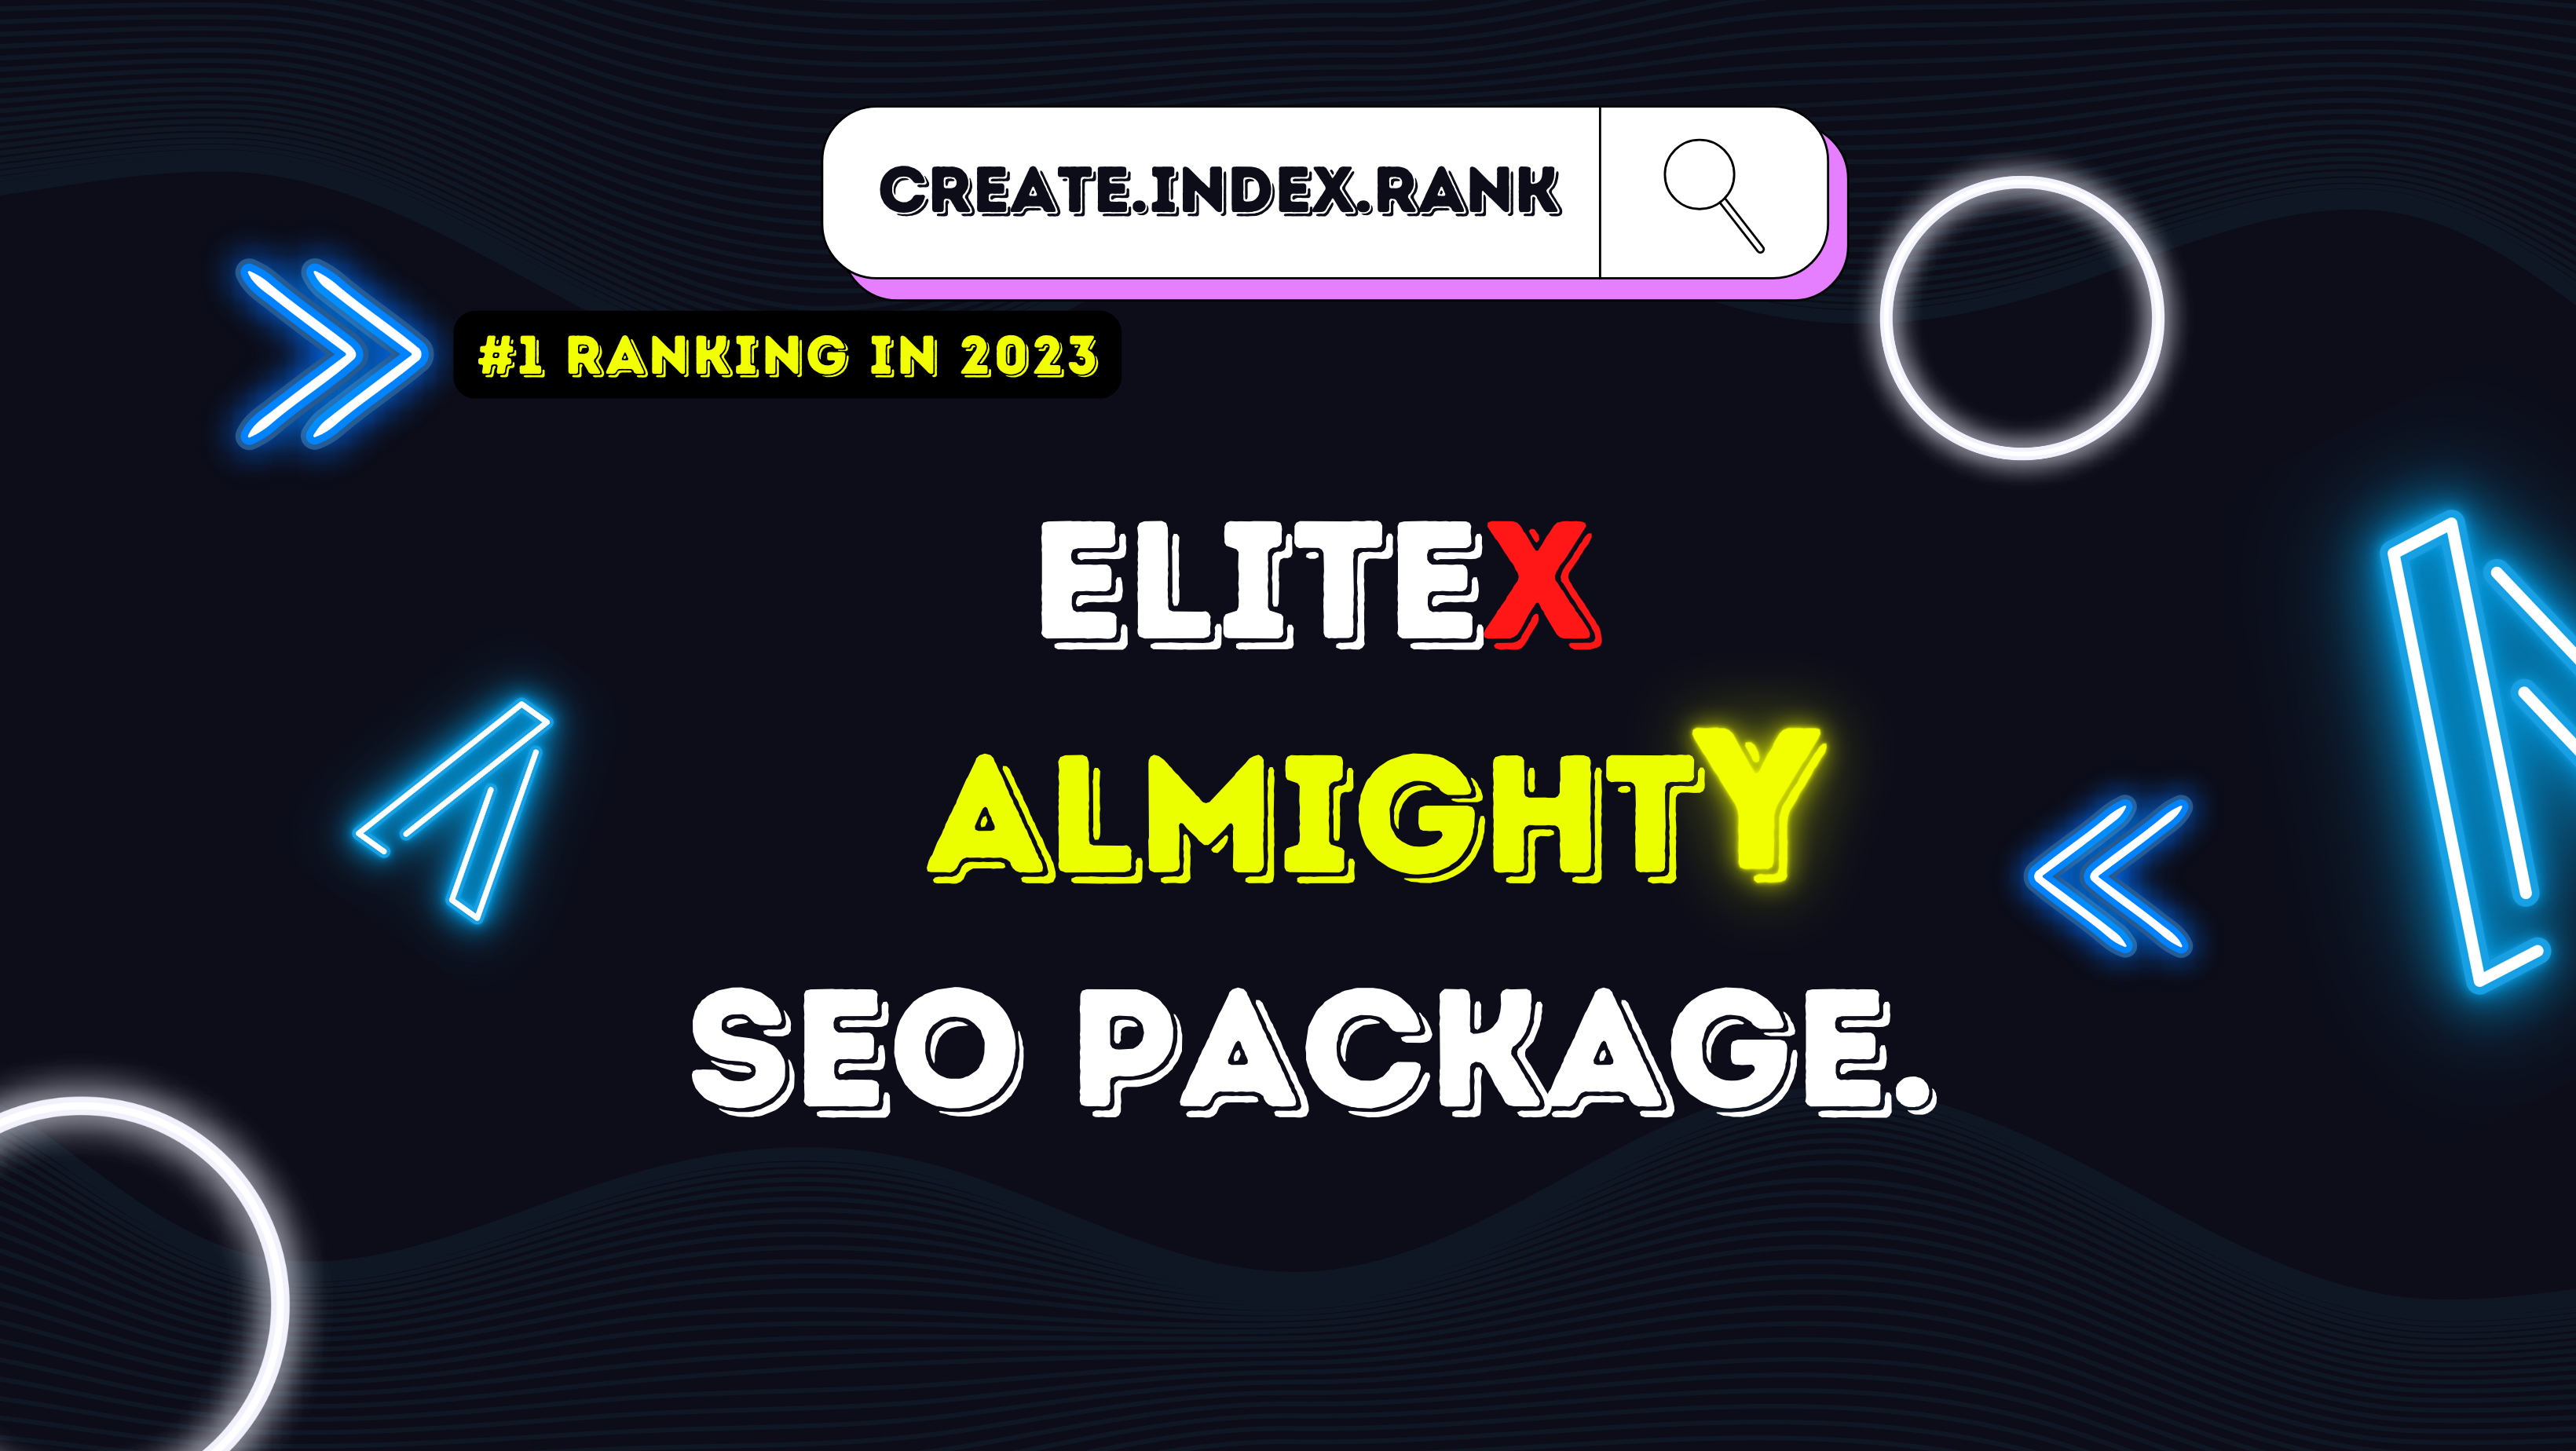 EliteX Almighty SEO PACK No 1 Ranking In 2024 - Boost Traffic & Sales